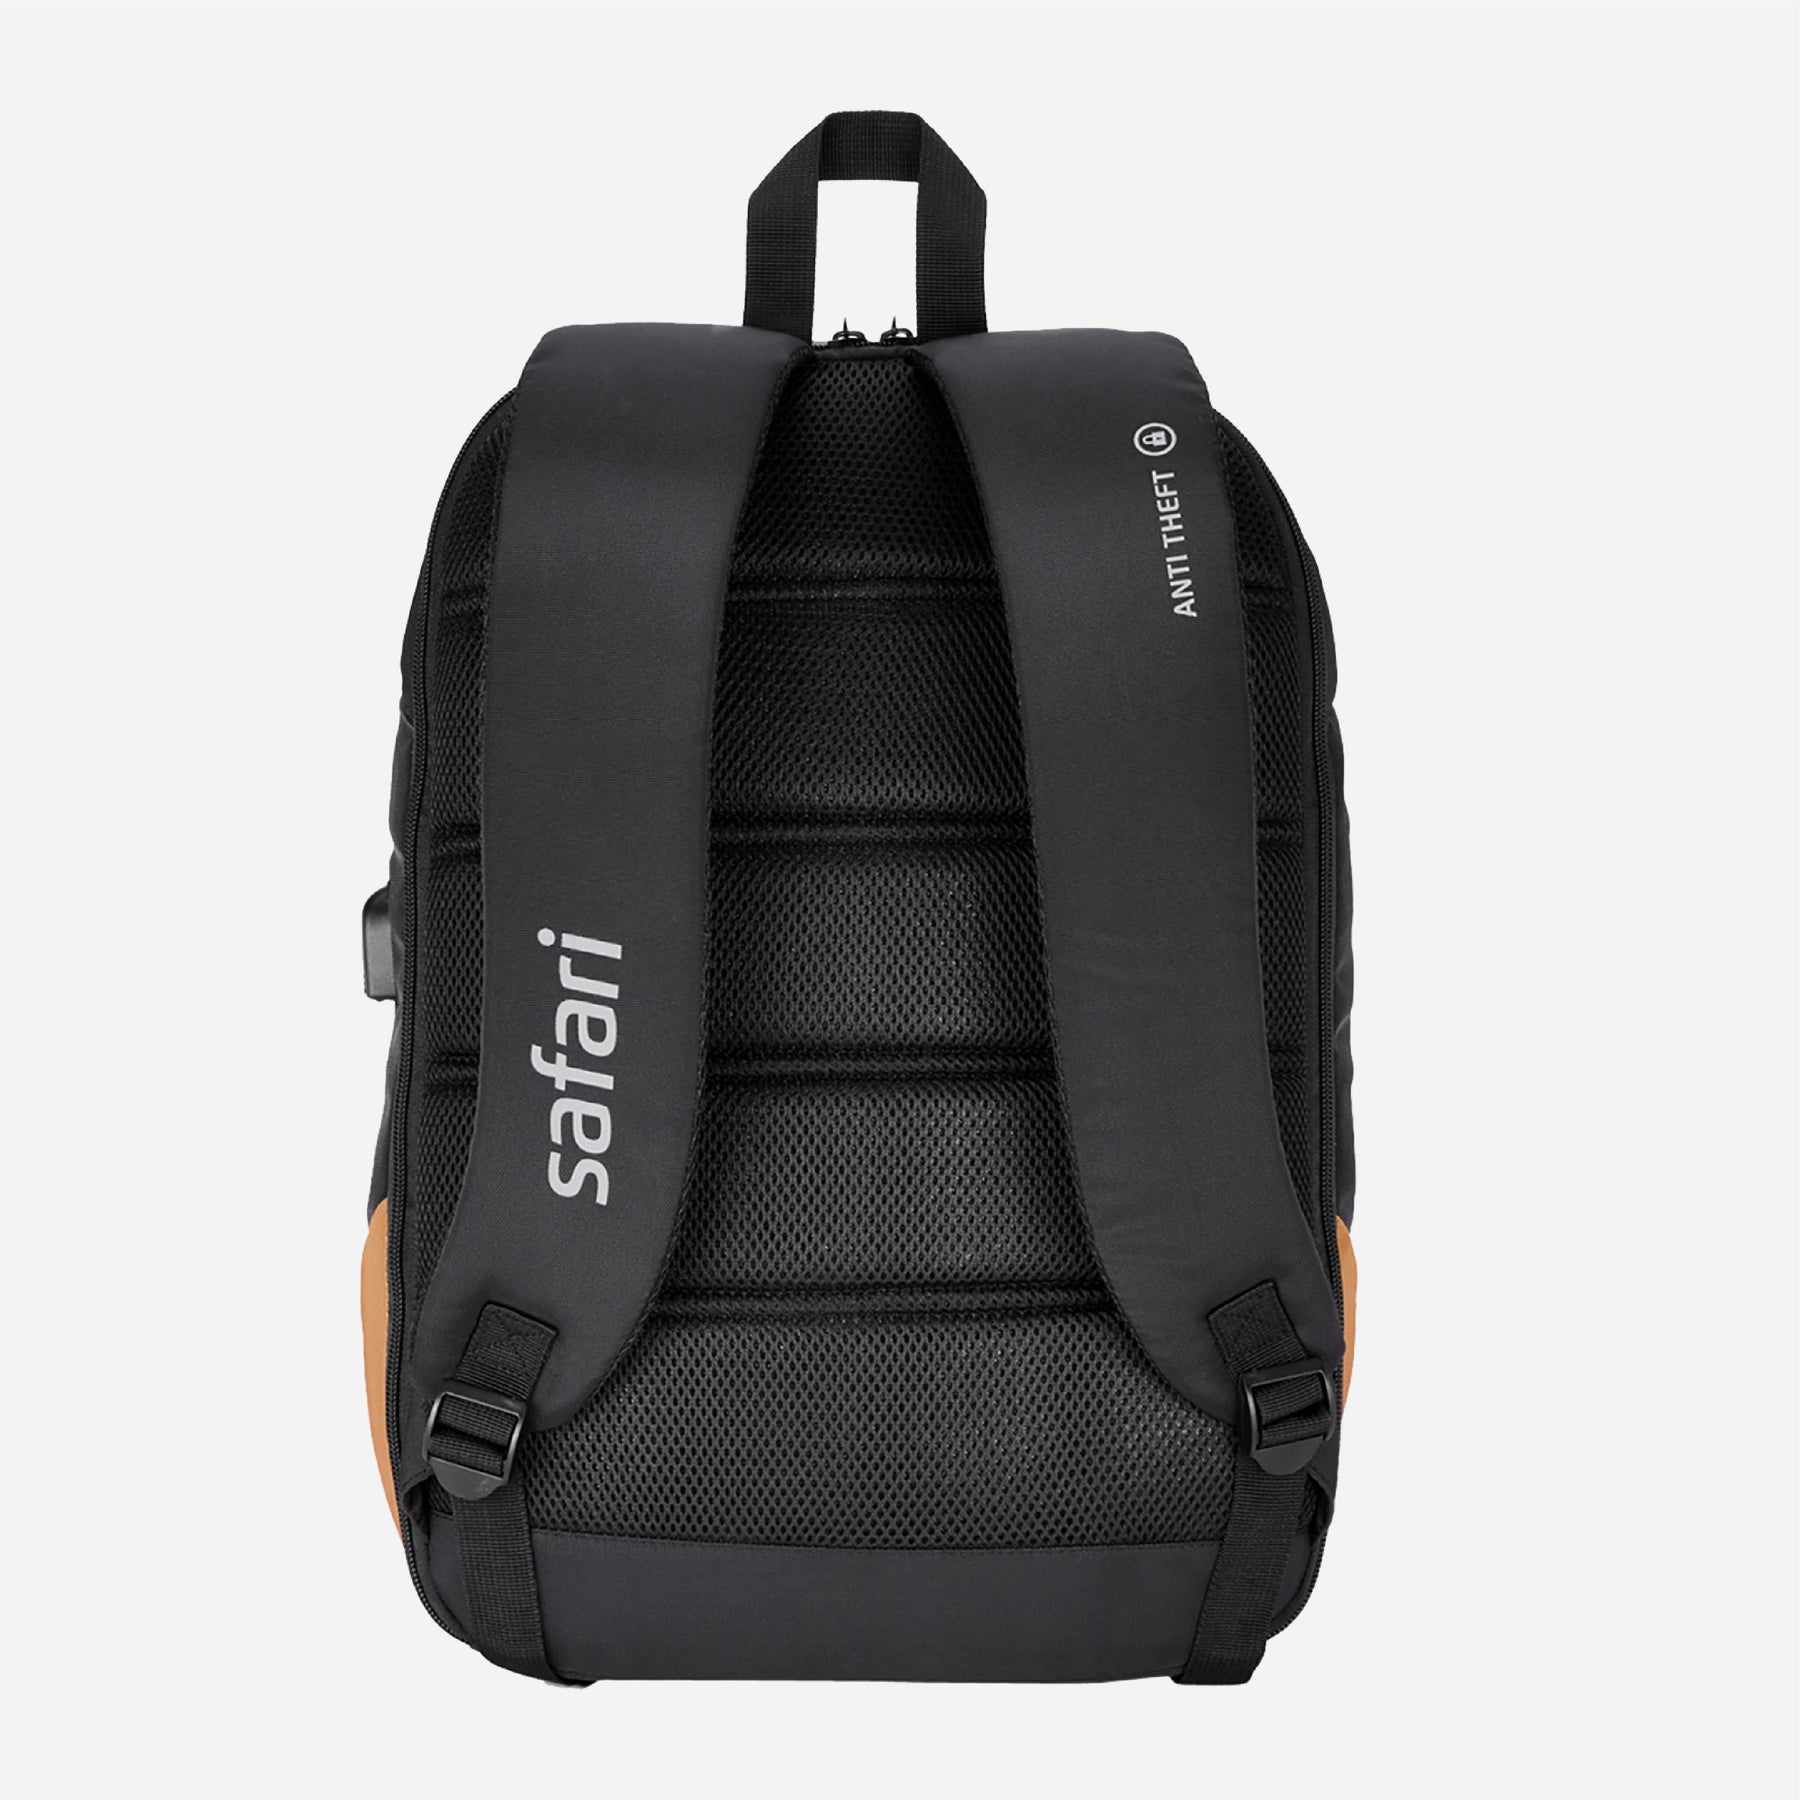 Ignite Hard luggage and Vault Laptop Backpack- Anti-Theft Combo